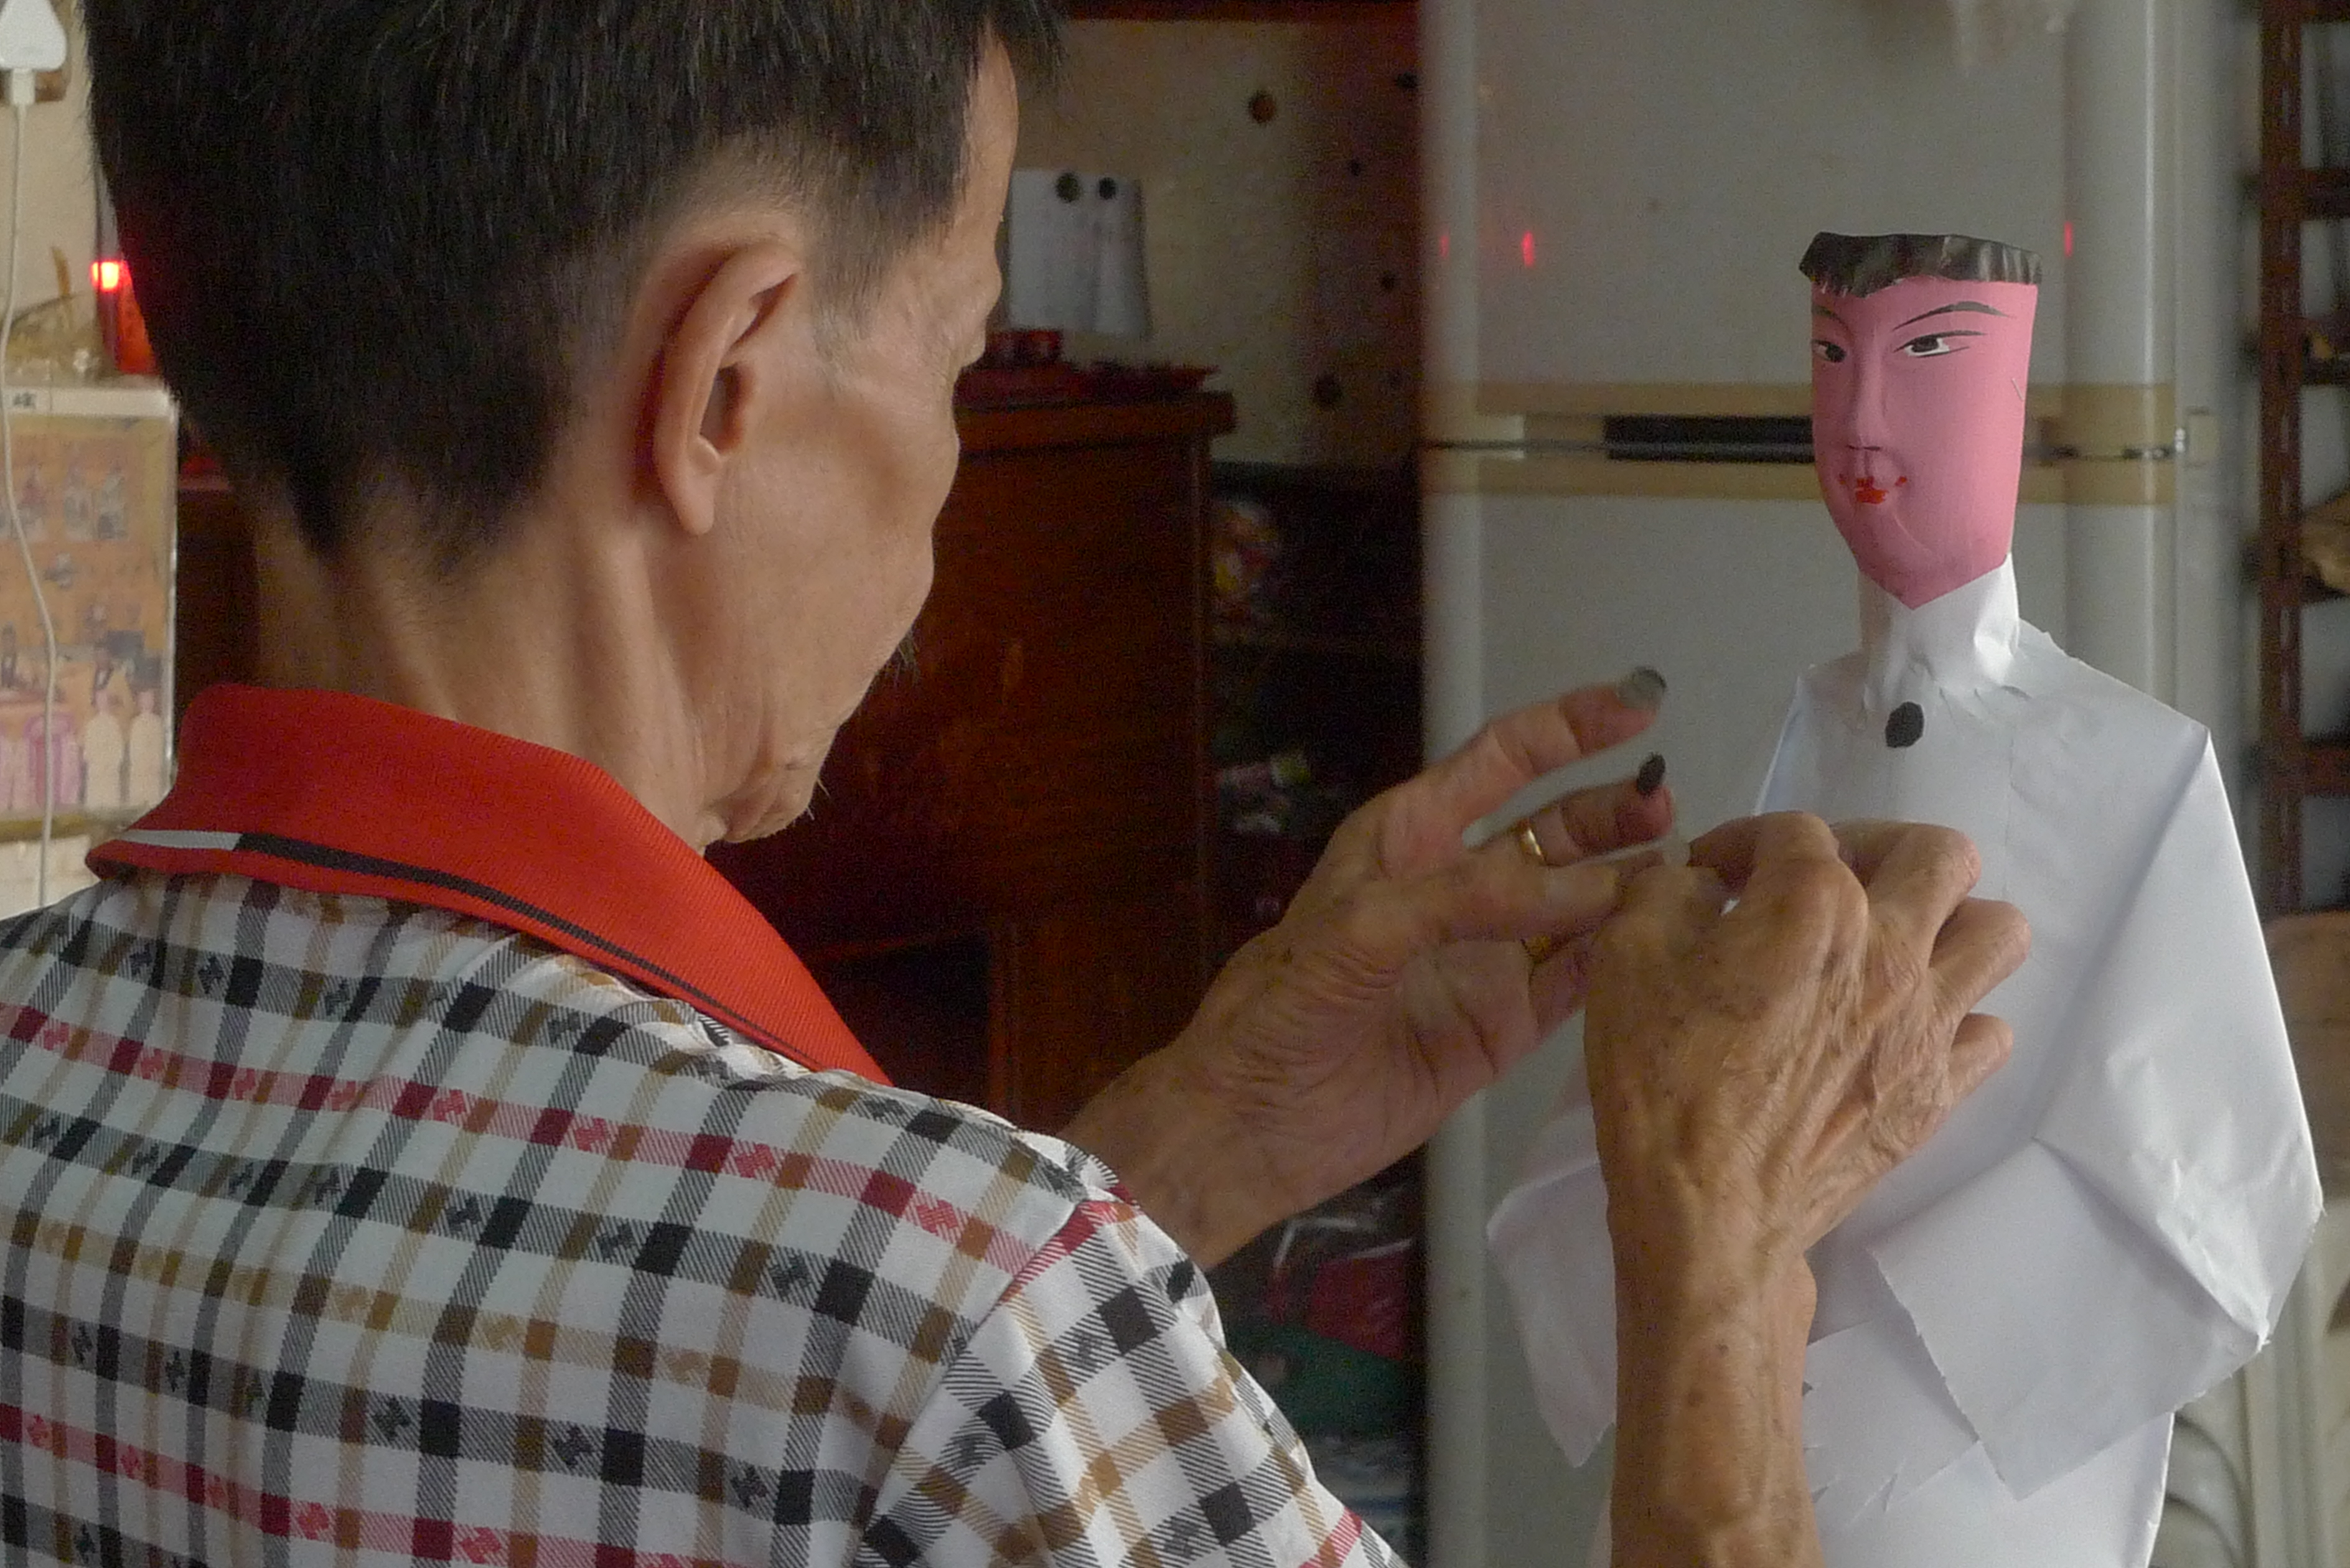 Mr Lai Yew Onn, the owner of Yew Chye Religious Goods Trading, creating the clothes of a paper human figure. 